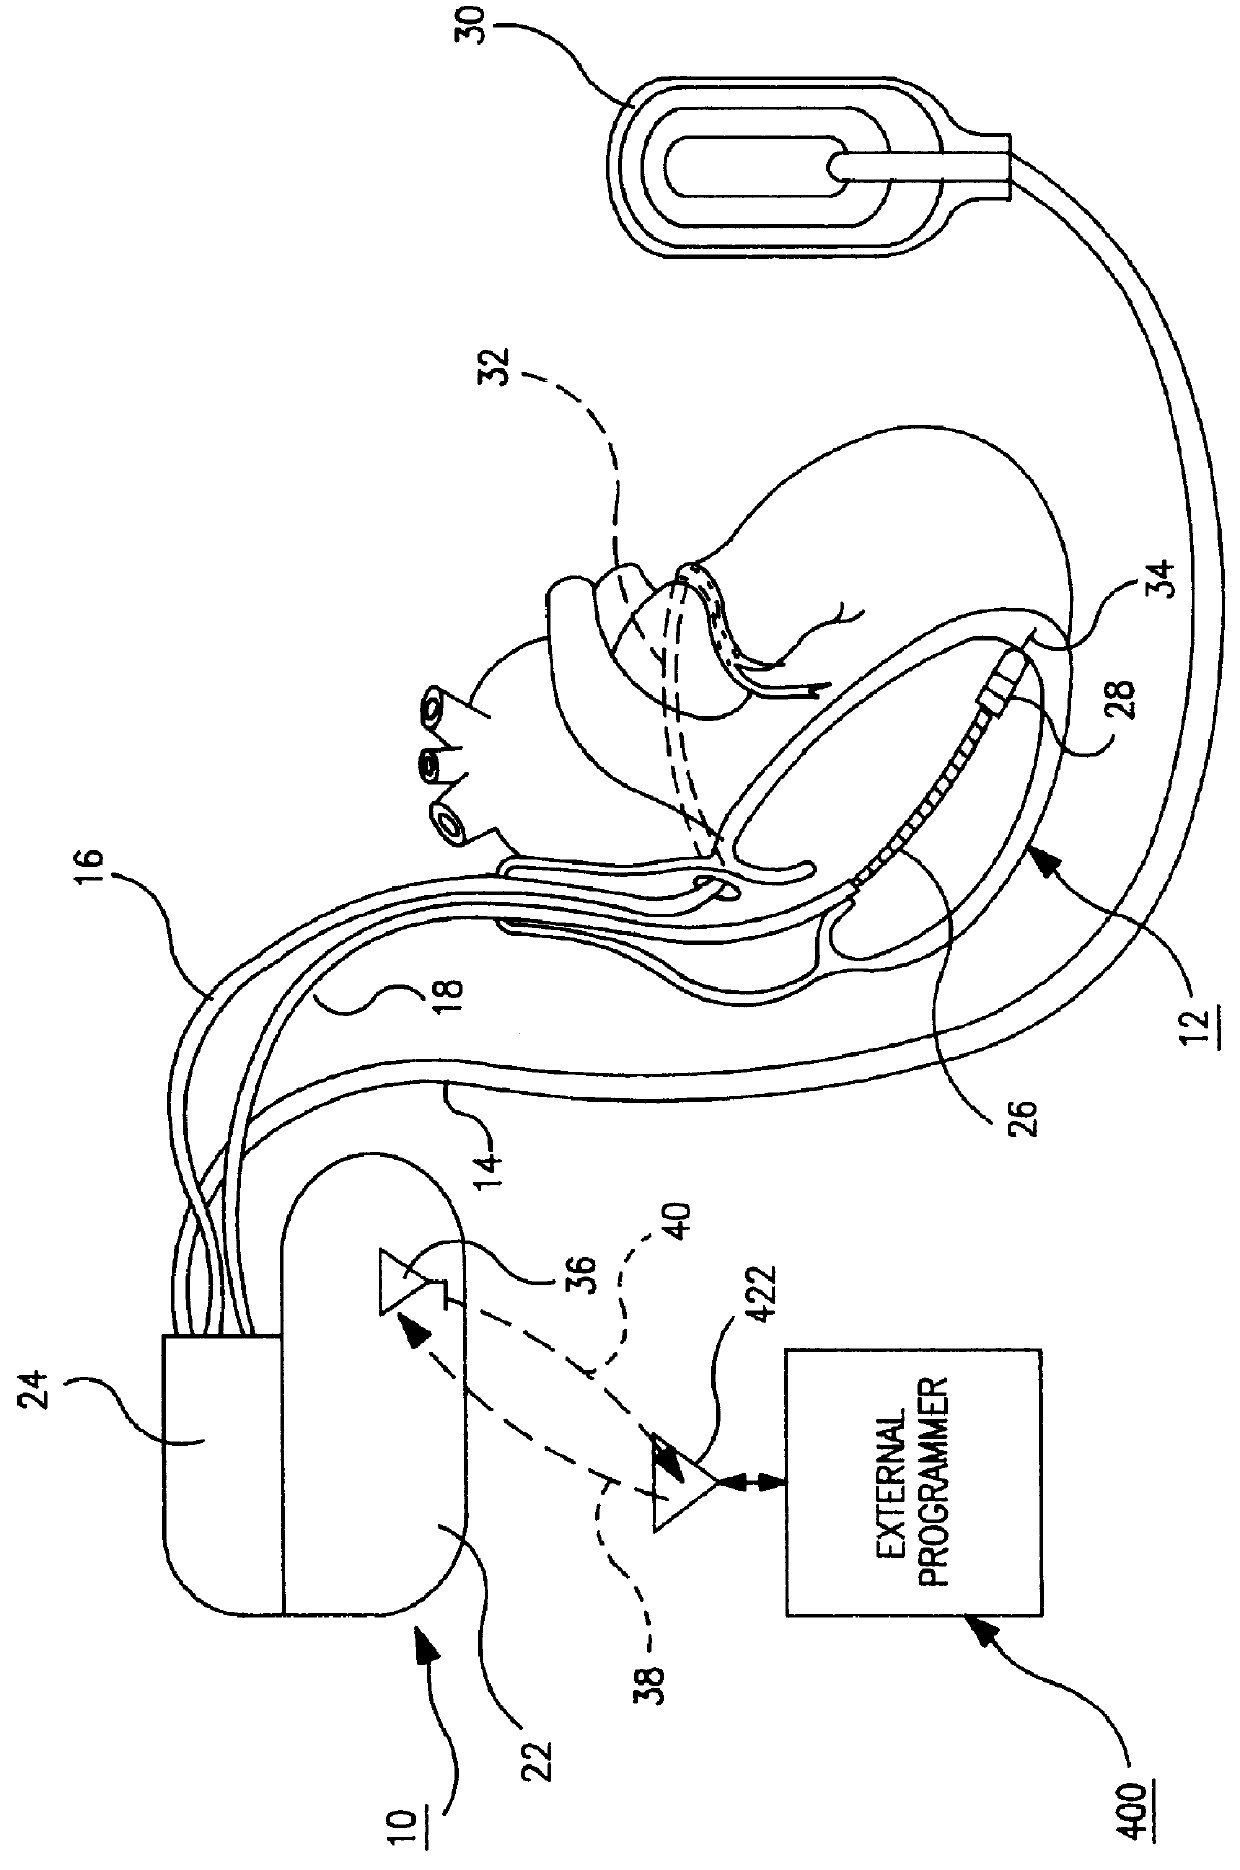 Error code calculations for data stored in an implantable medical device